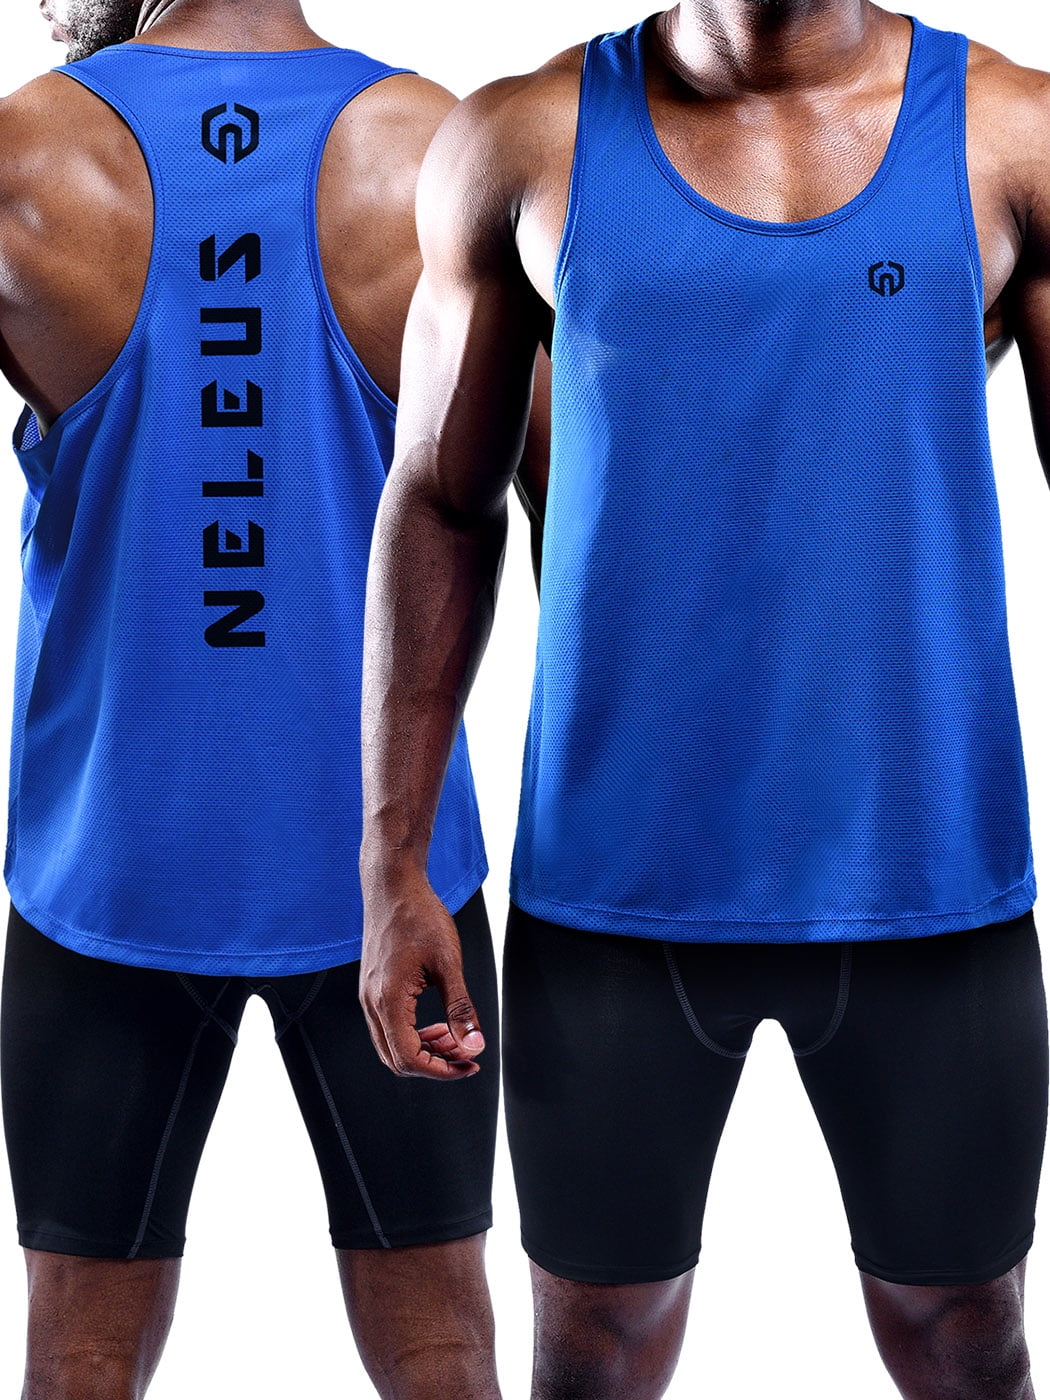  NELEUS Men's 3 Pack Workout Running Tank Top Sleeveless Gym  Athletic Shirts,5080,Black/Grey/Blue,S : Clothing, Shoes & Jewelry